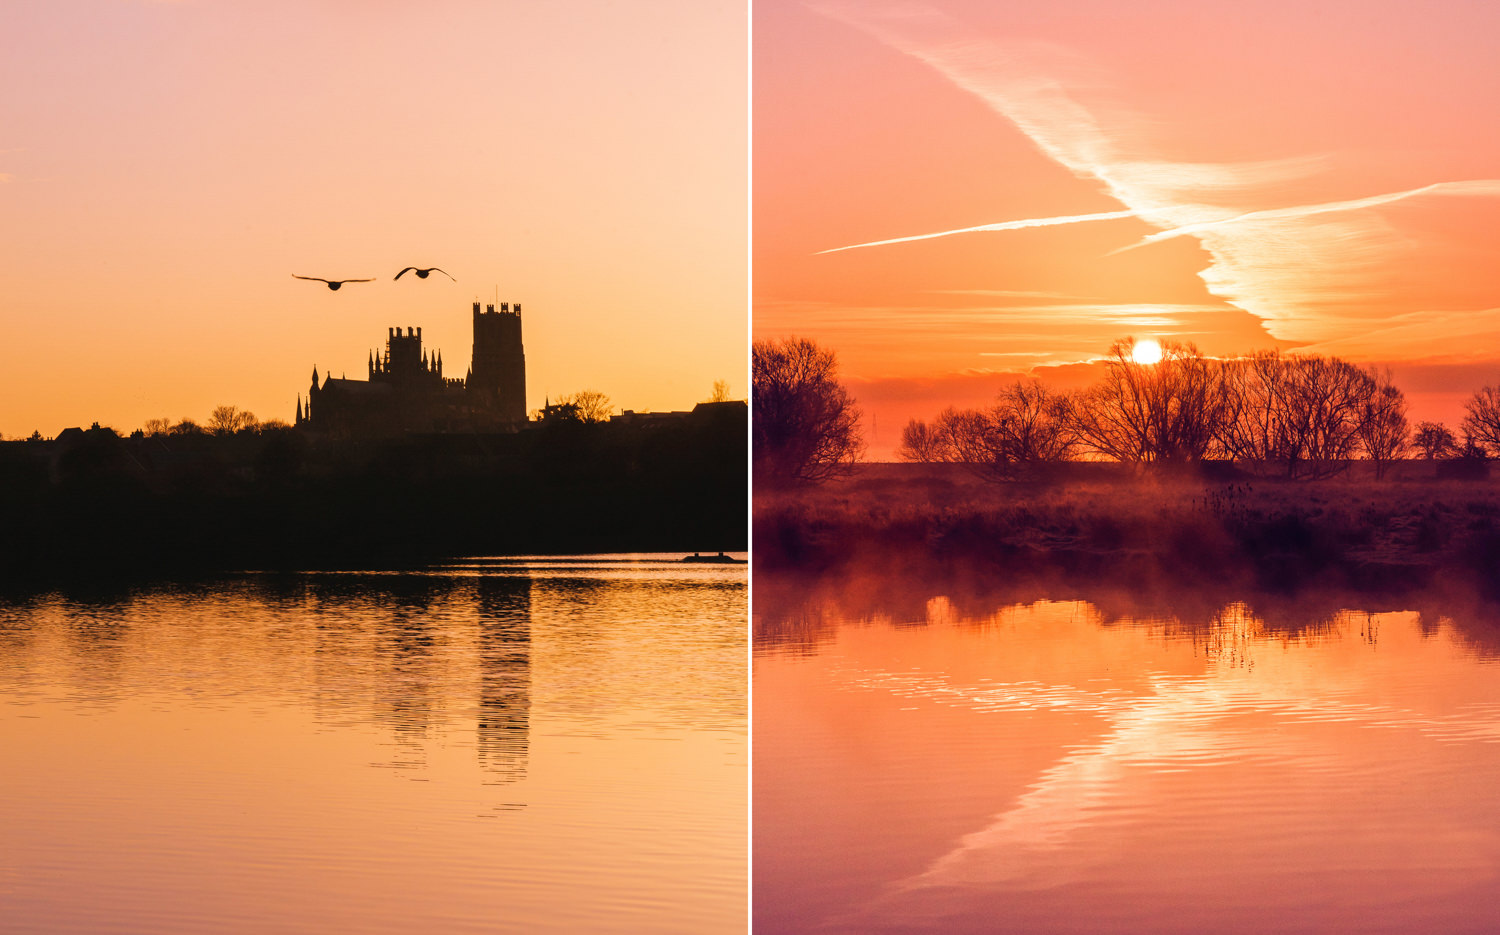 Ely cathedral at sunset and a clouds at sunrise along a river